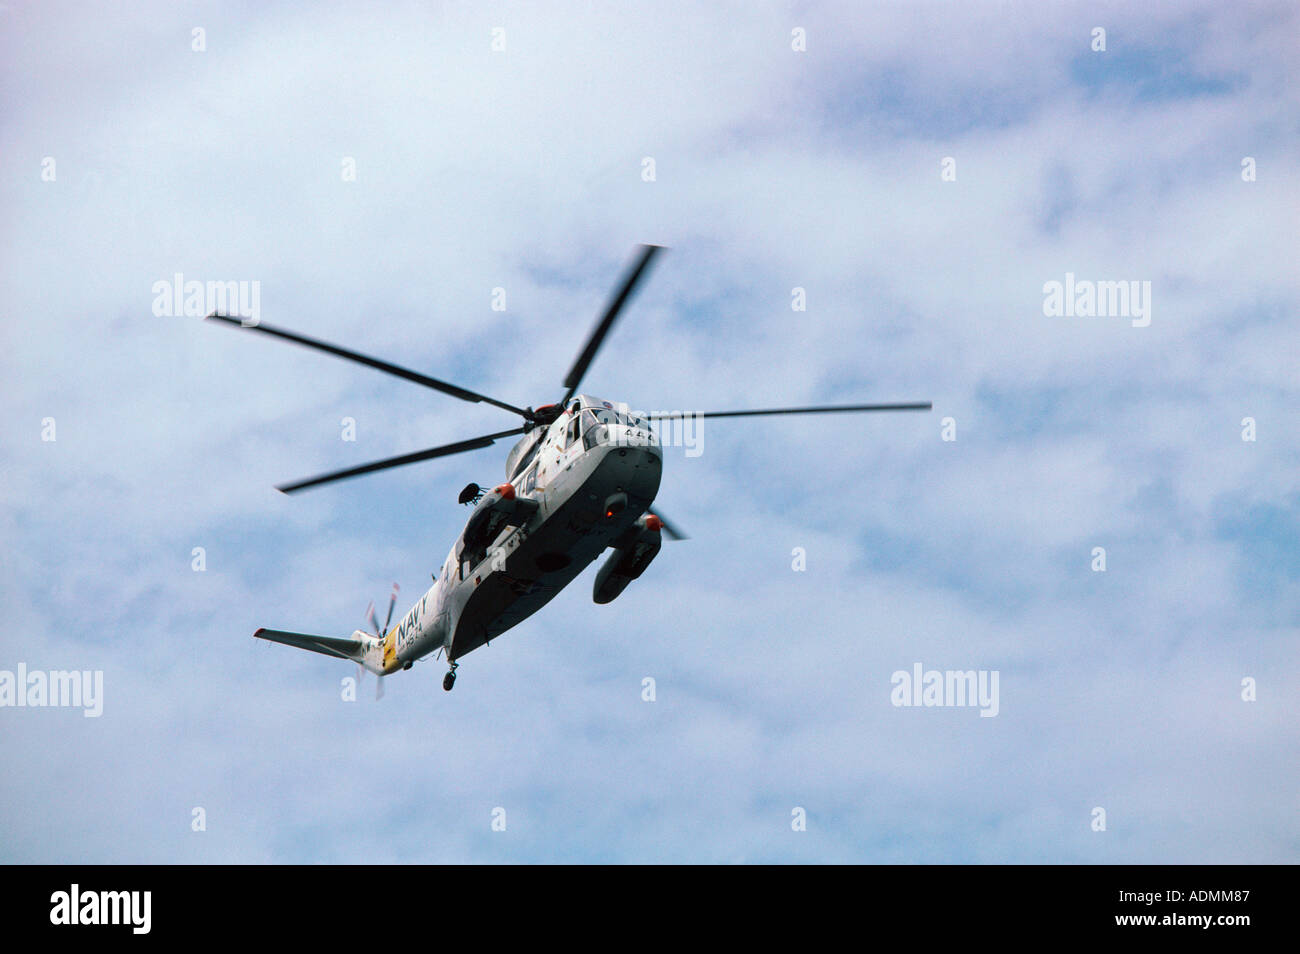 Low angle view of a Sikorsky SH-3 Sea King in flight Stock Photo